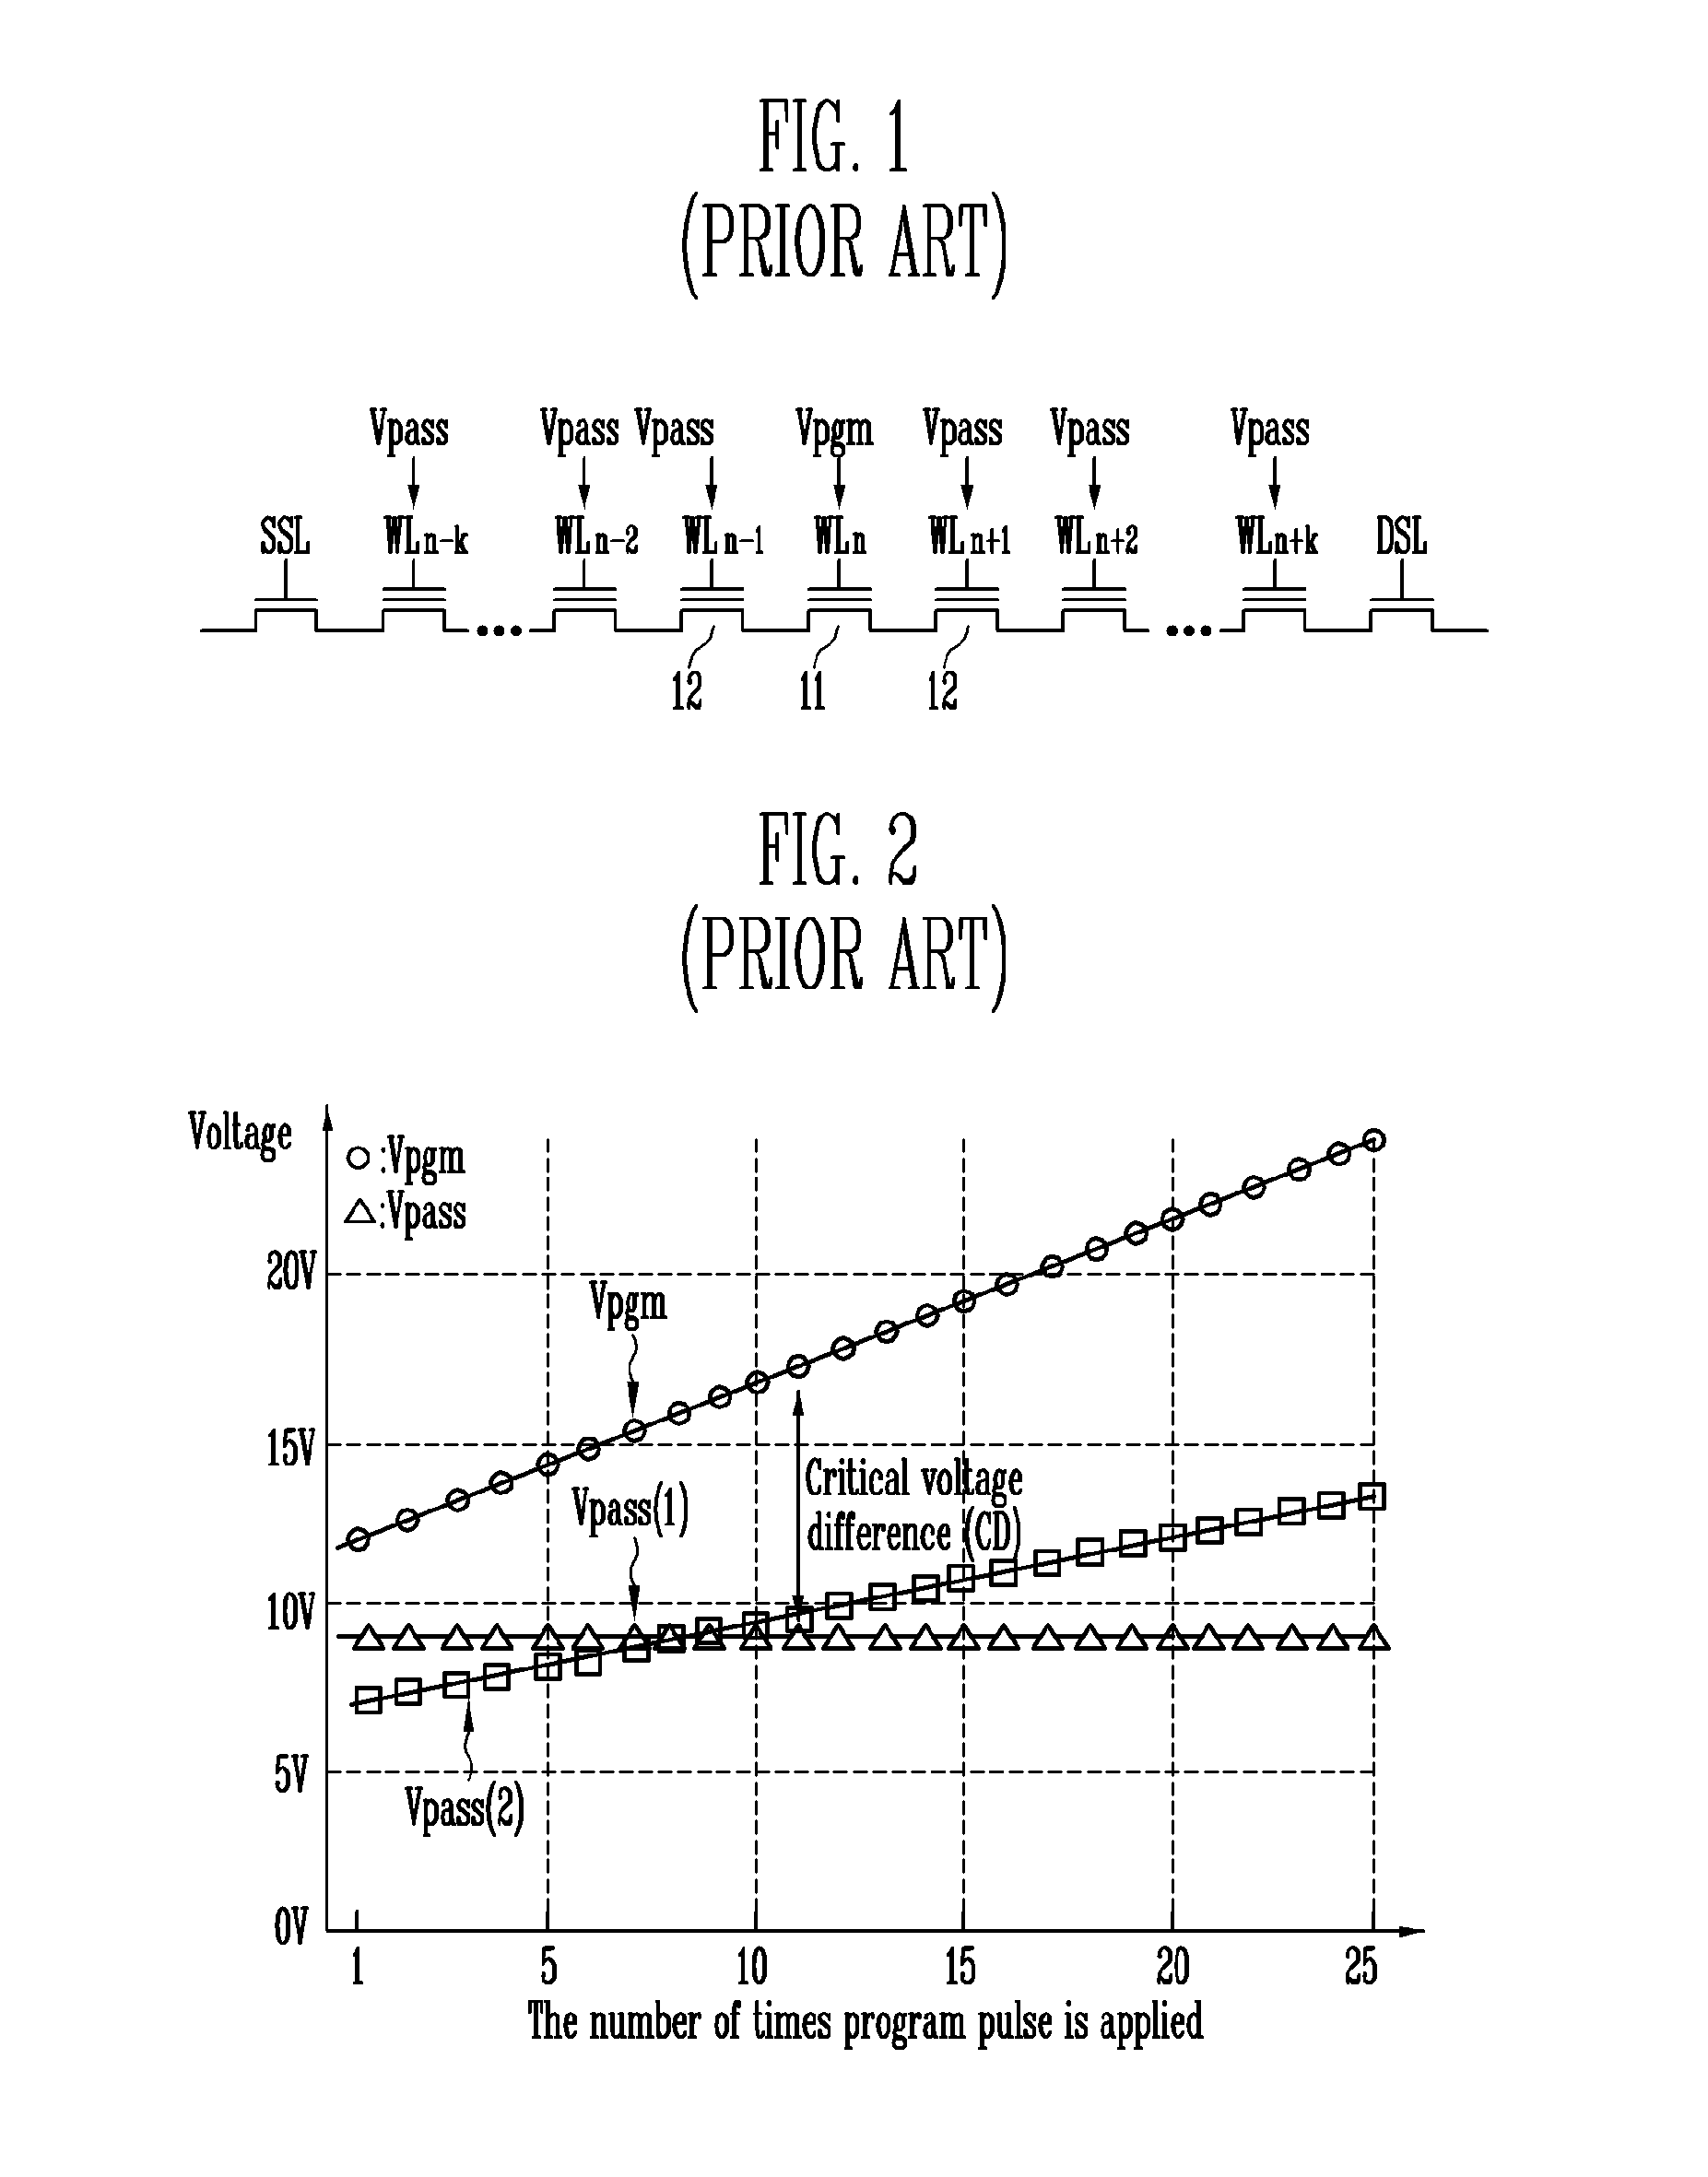 Method of operating semiconductor device